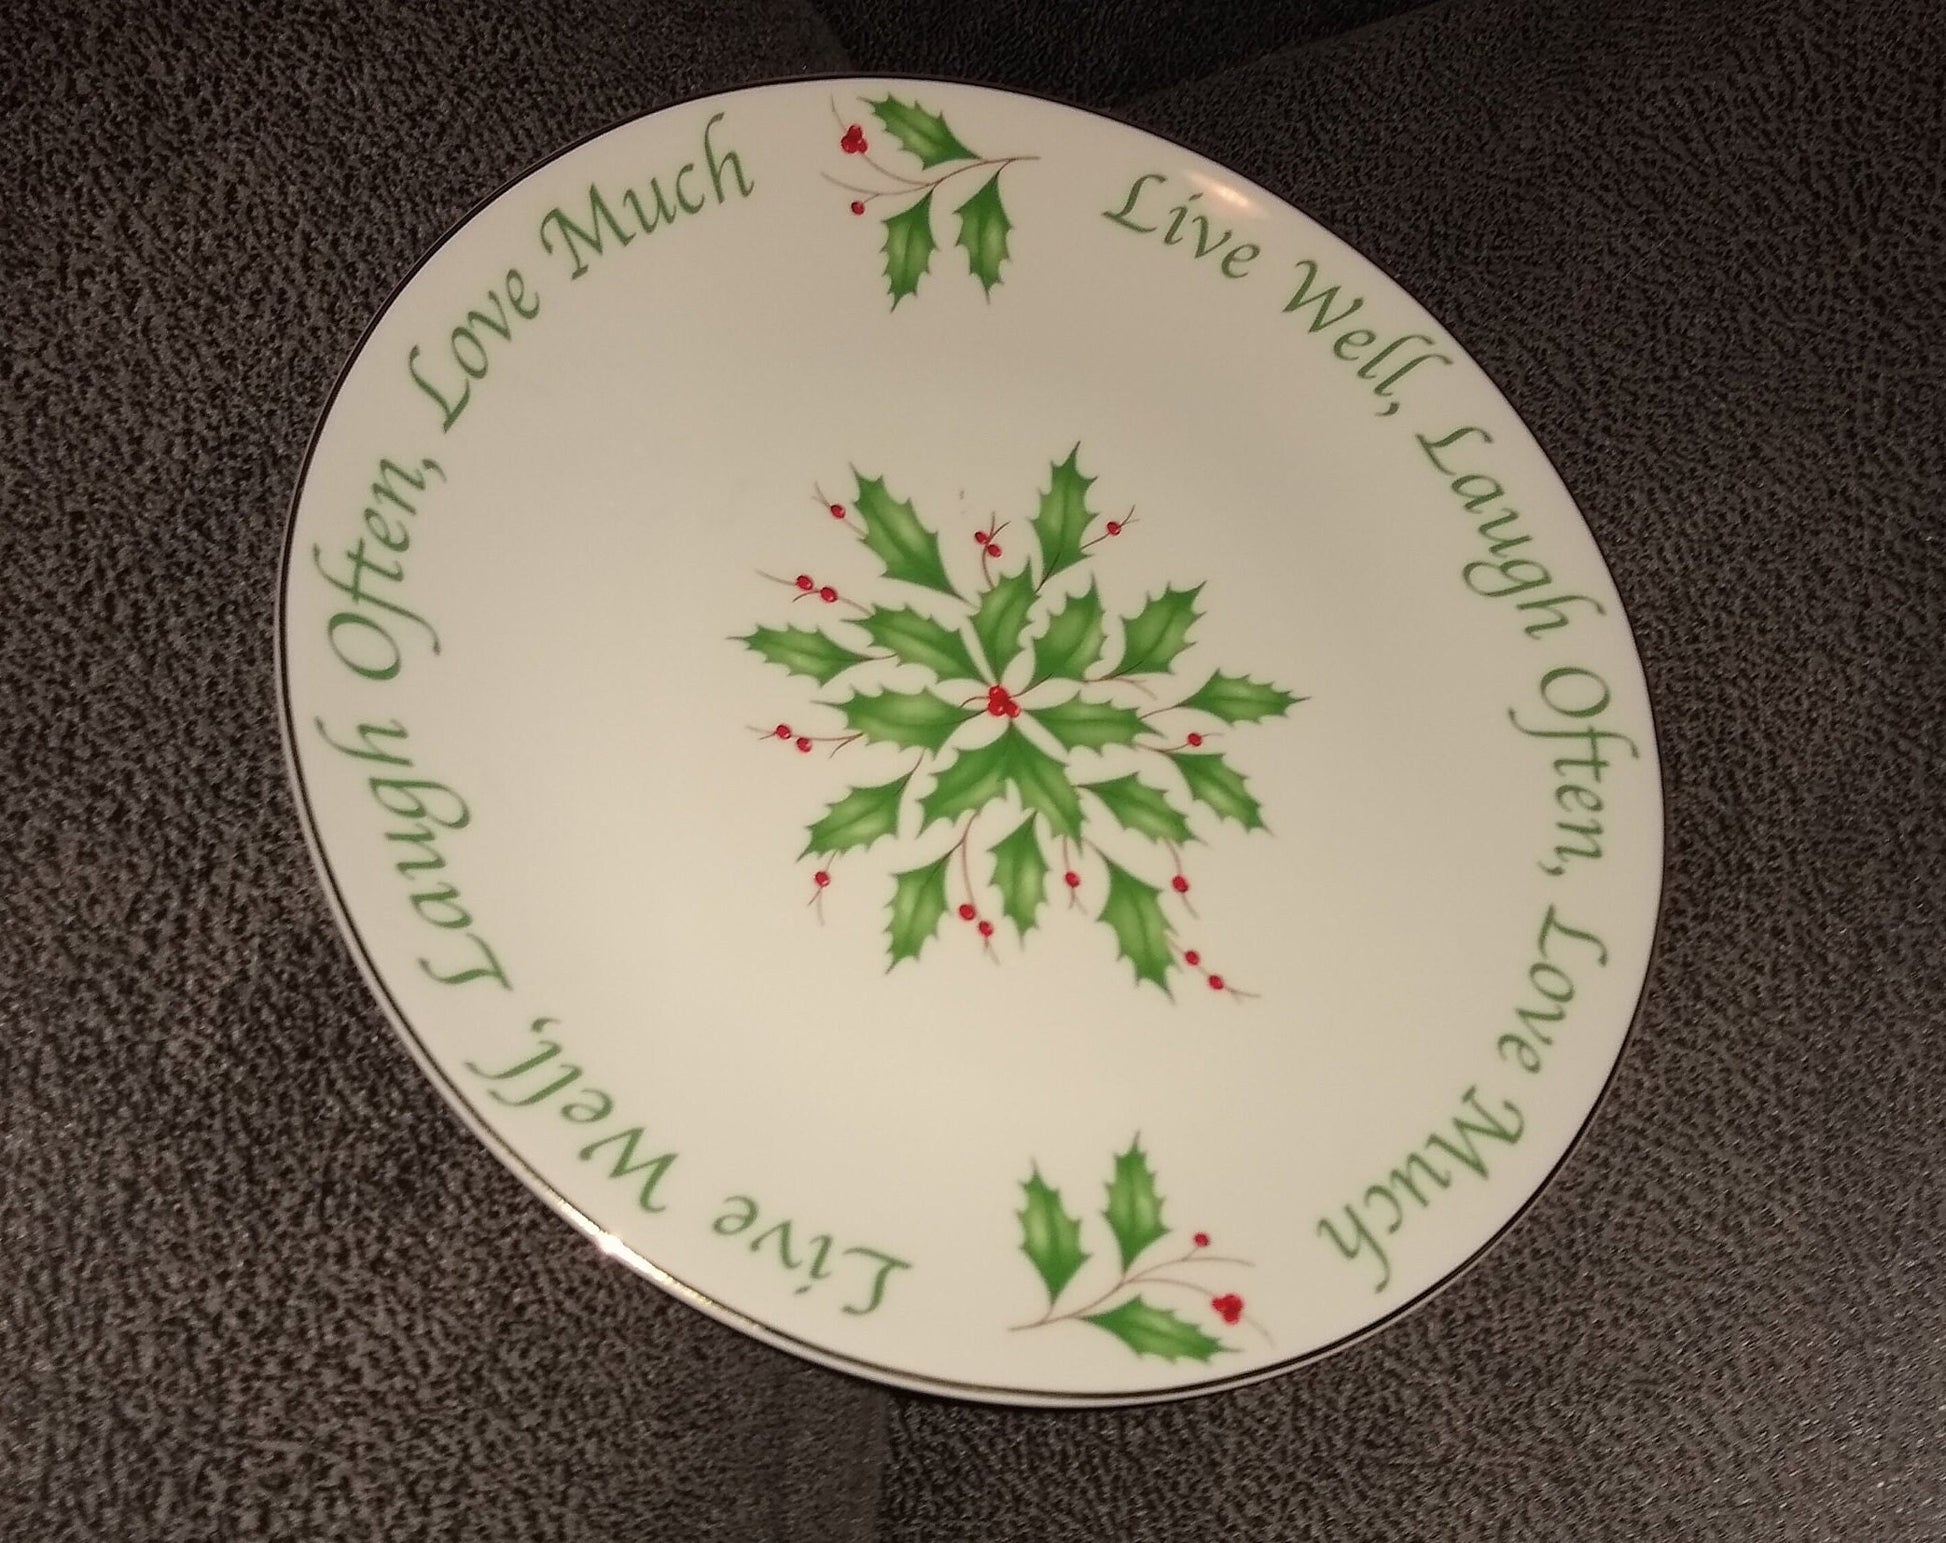 Lenox Christmas Holiday Plate  Side Angle With Green Holly And Red Berries. Live Well, Laugh Often, Love Much. 1970's.